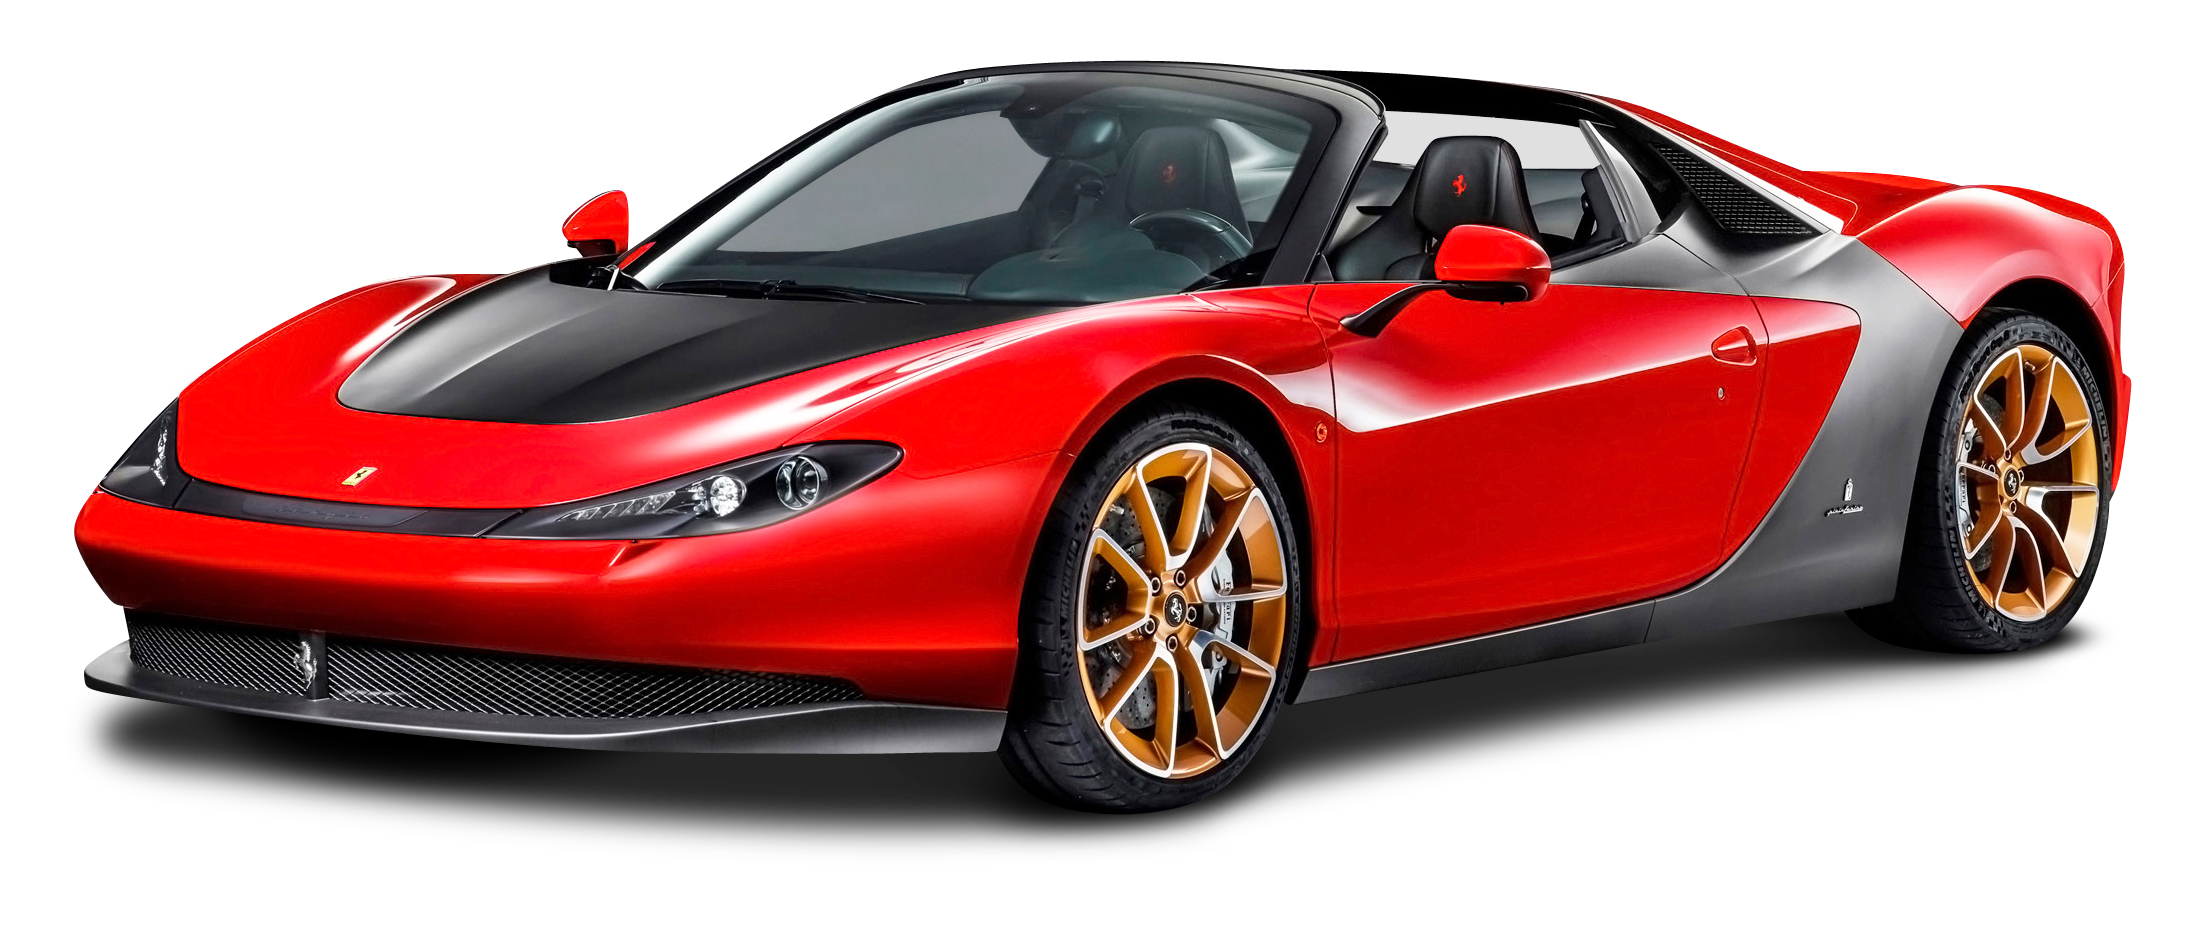 Car Red PNG - 140841